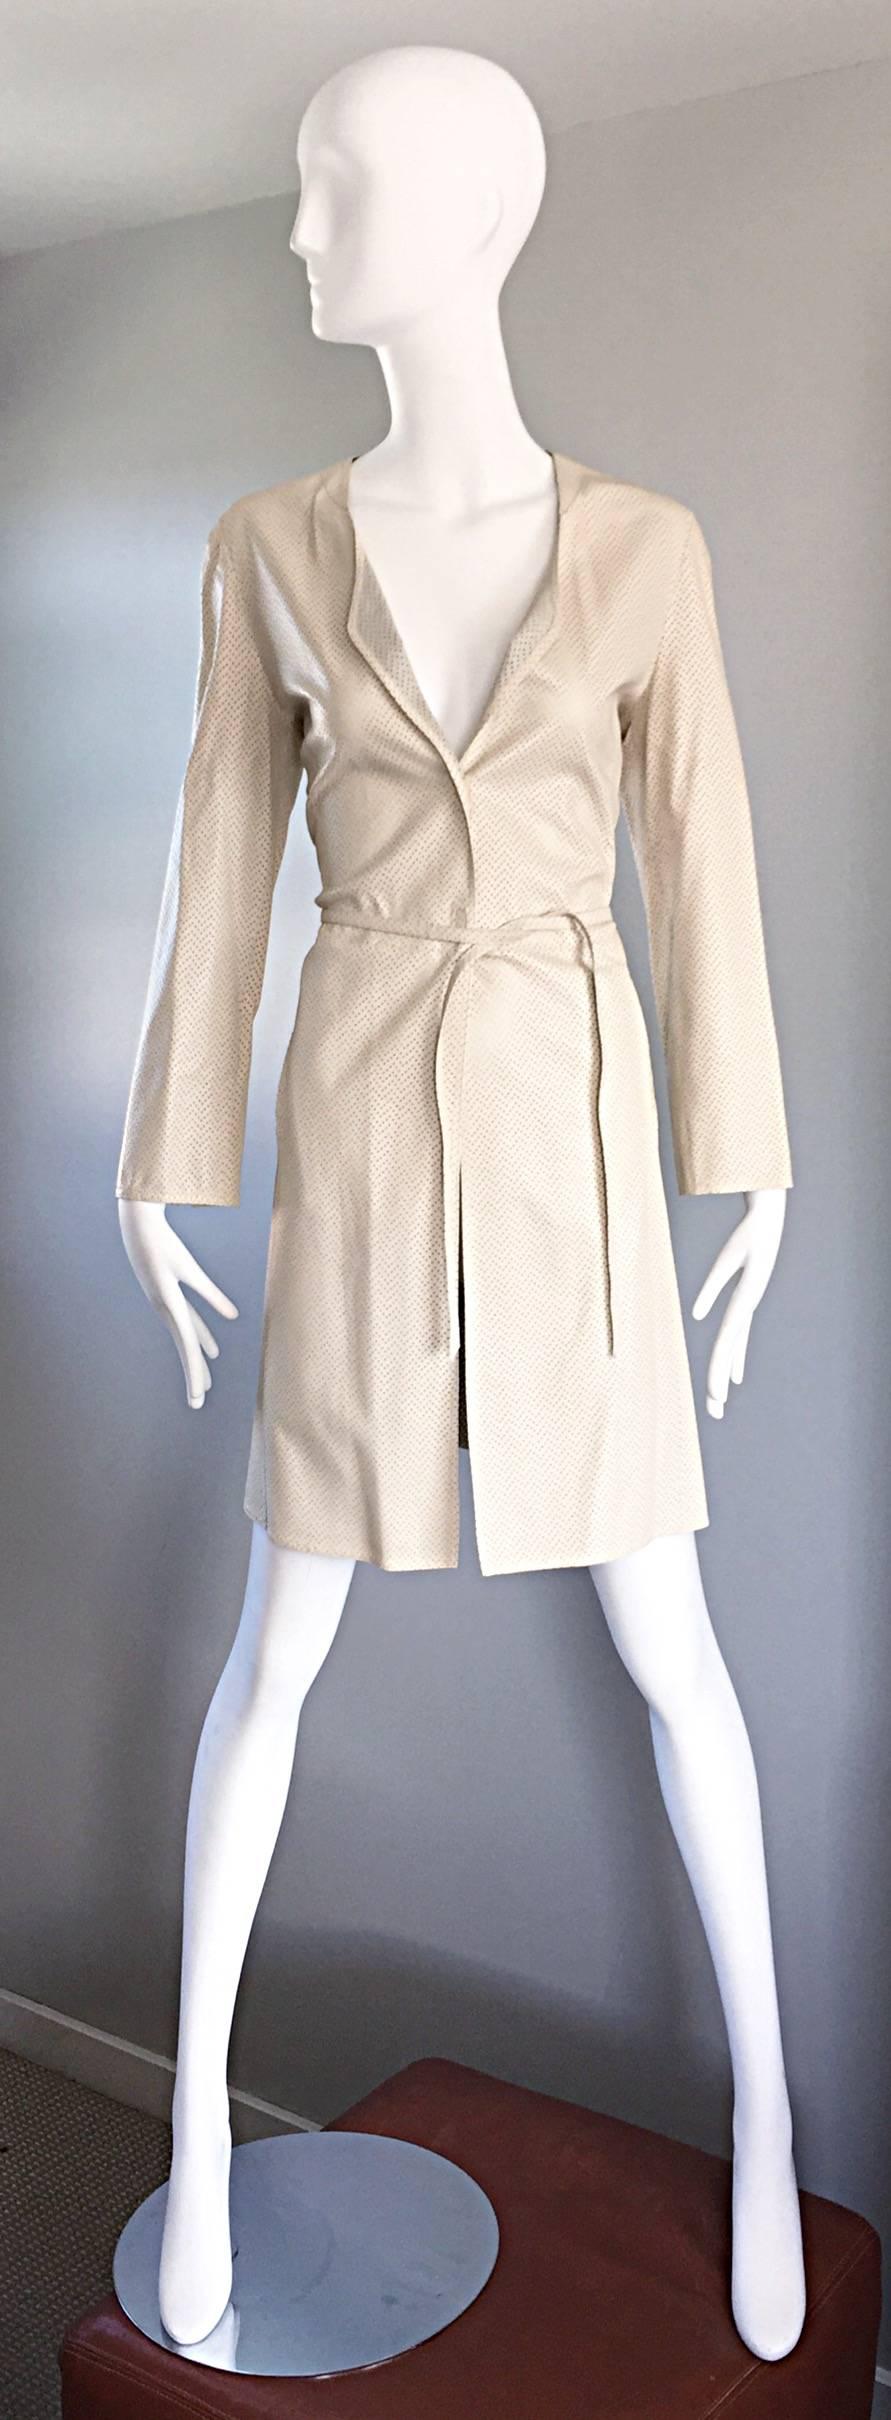 Vintage Giorgio Armani 1990s Ivory Beige Perforated Leather 90s Trench Jacket  For Sale 2